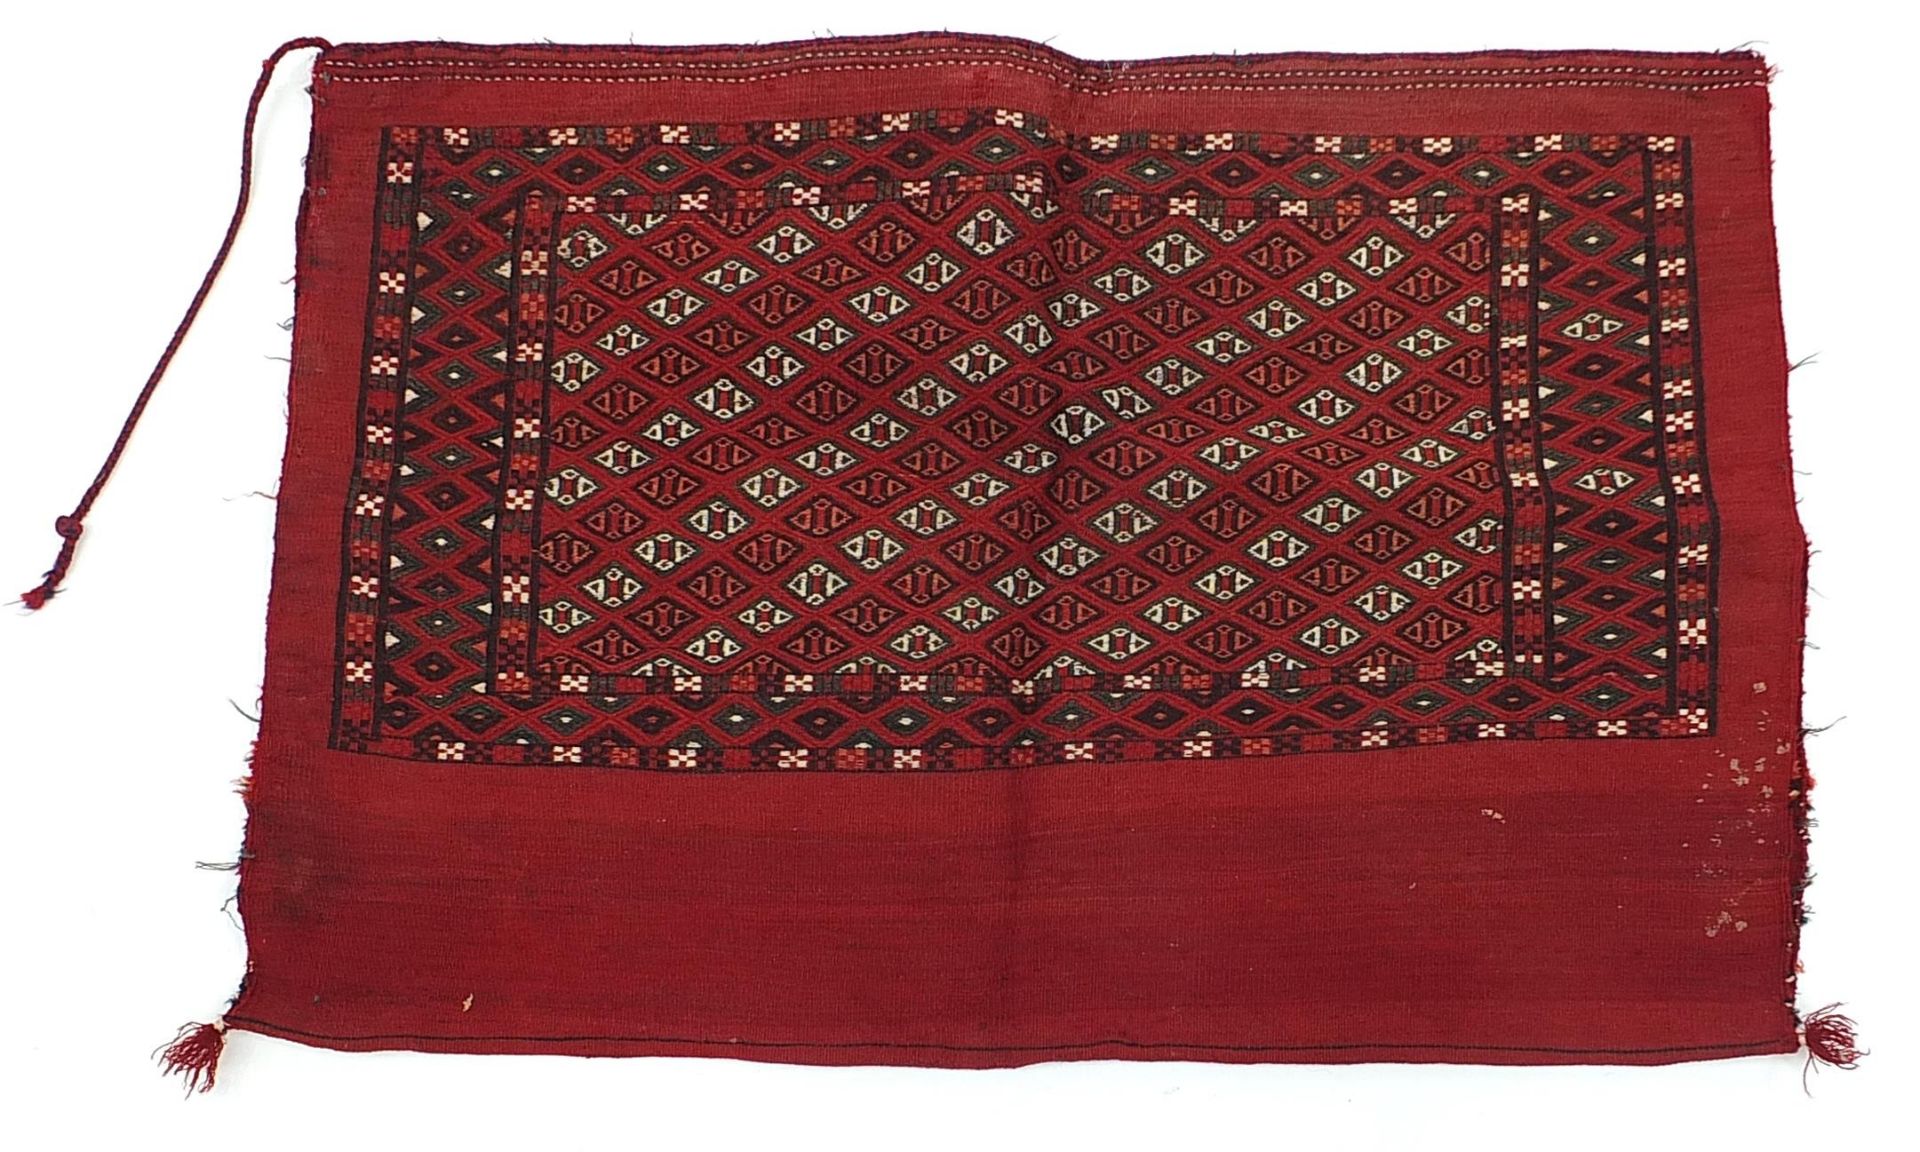 Middle Eastern Turkman Jewal saddle bag, 120cm x 71cm For further information on this lot please